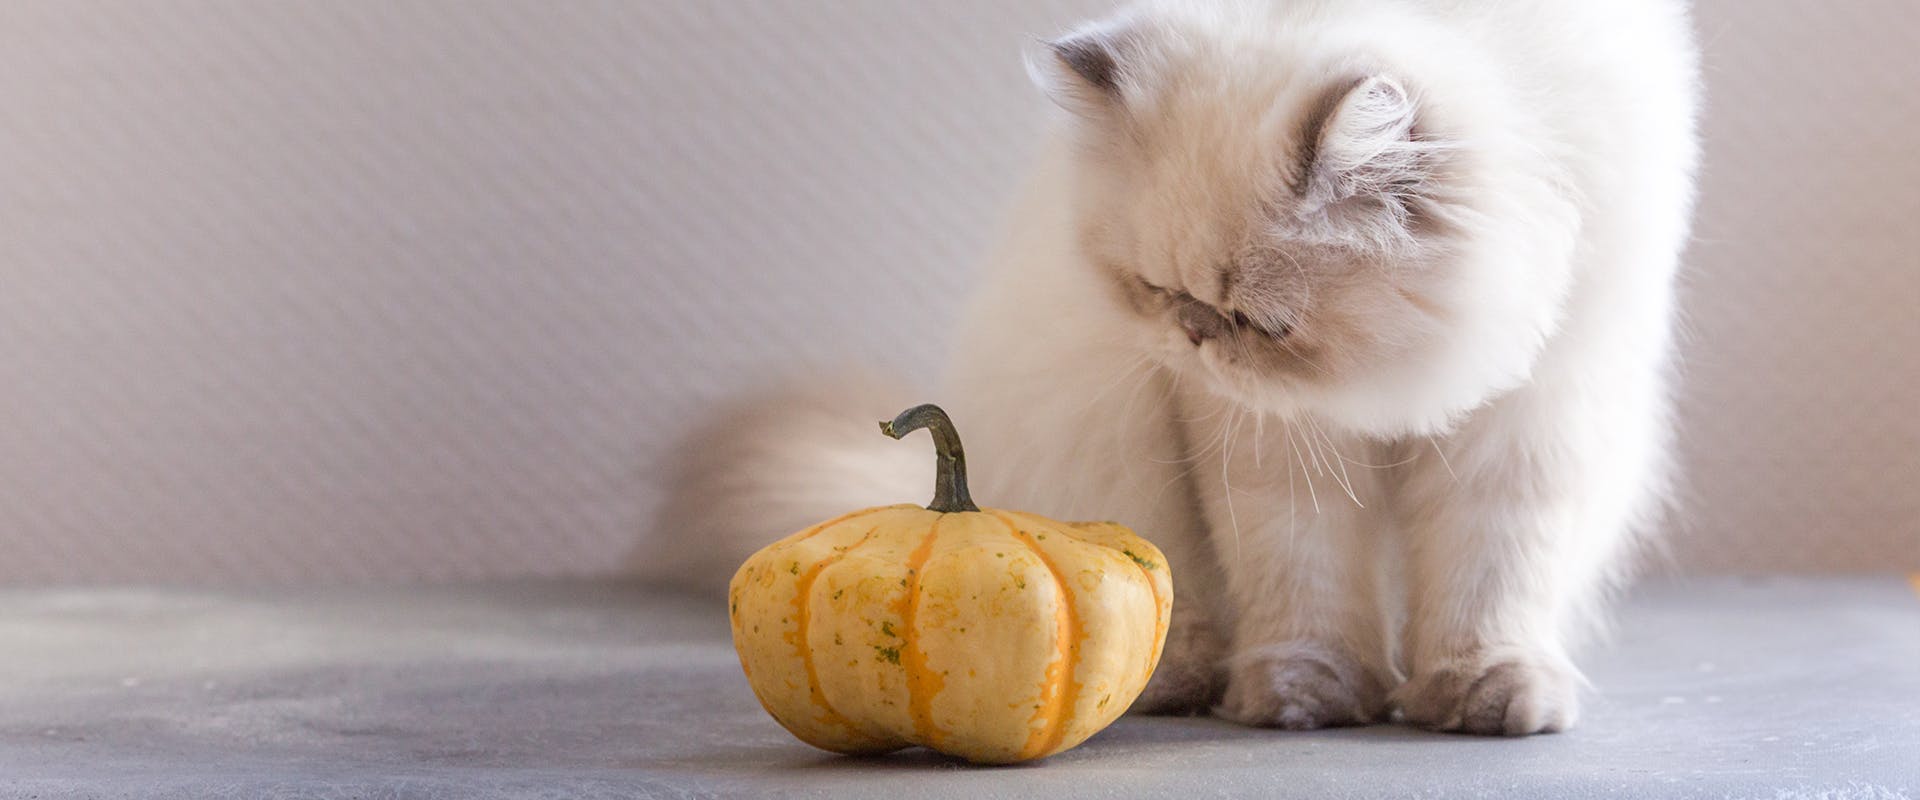 A fluffy white cat looking inquisitively at a small orange pumpkin